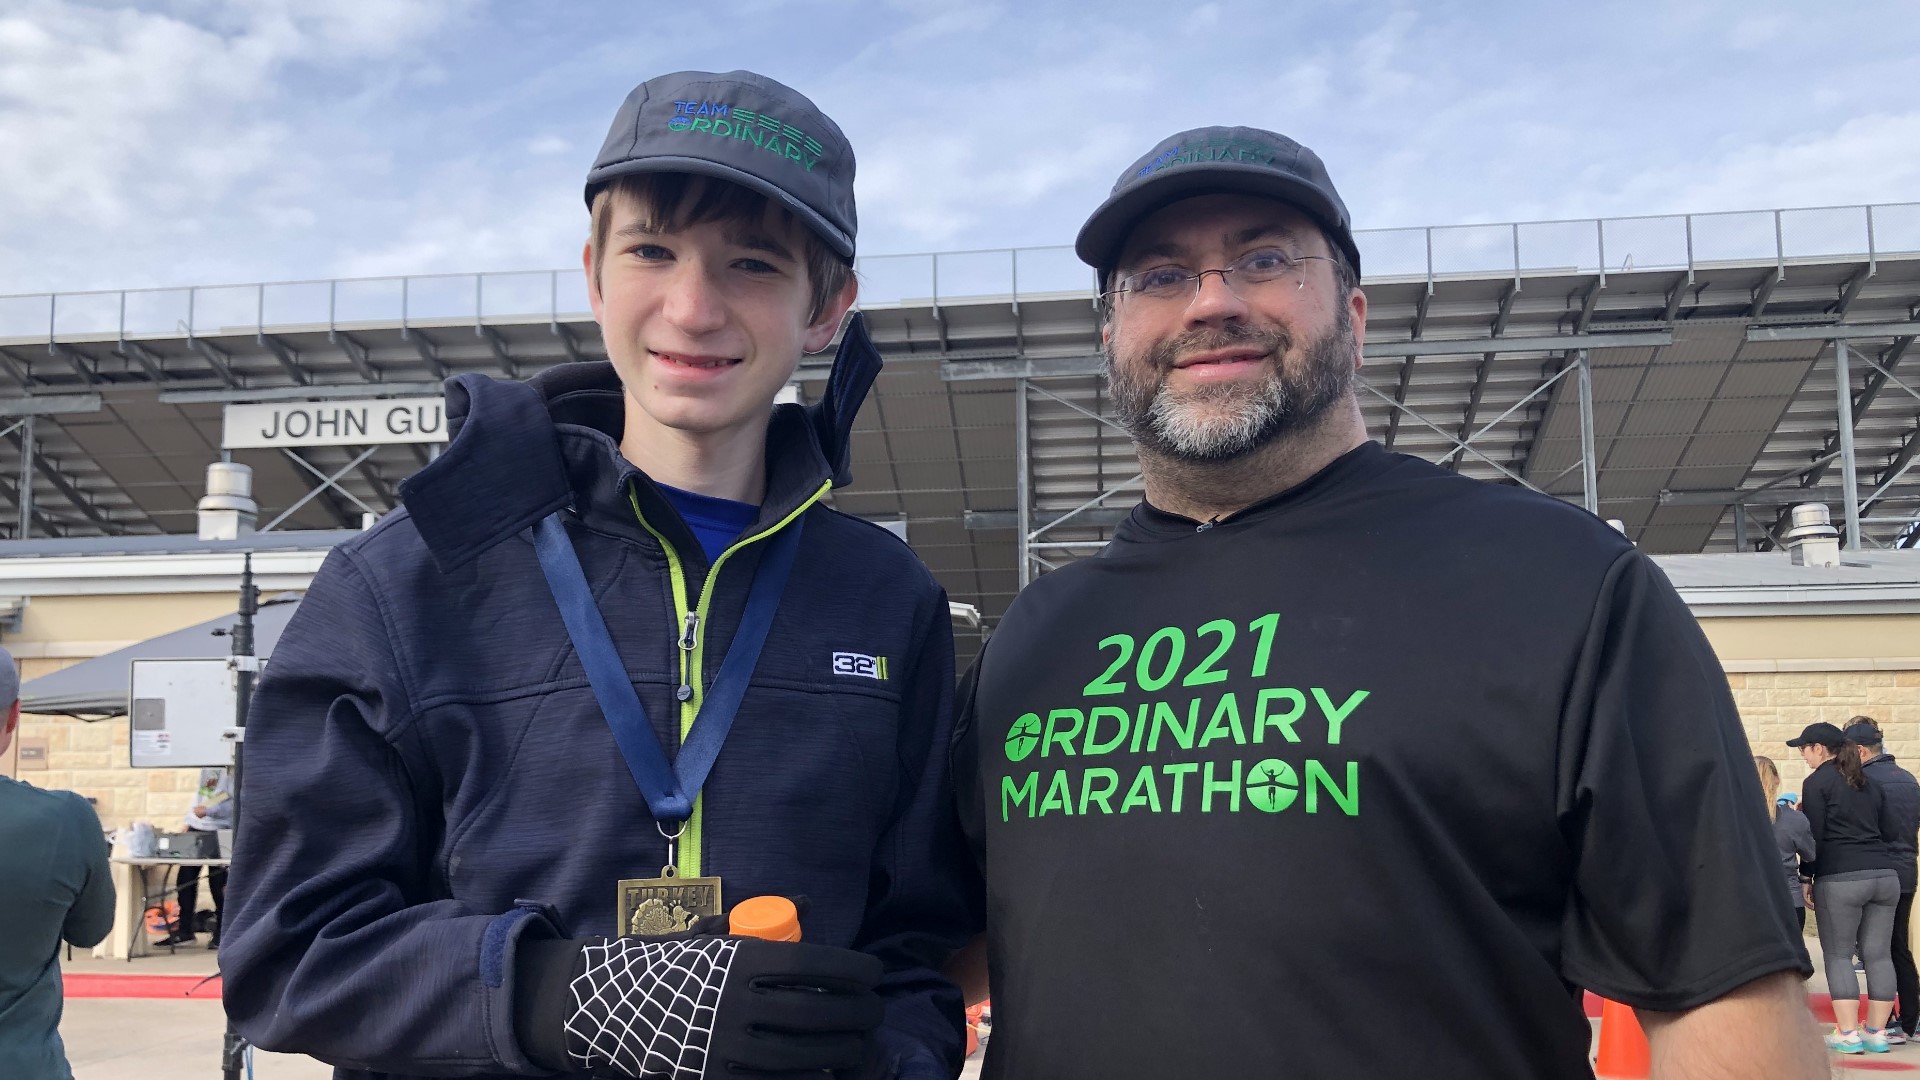 Thanks to the help of Ordinary Marathoner Foundation, Jonah Papovich finished his first 5K on Thanksgiving Day.